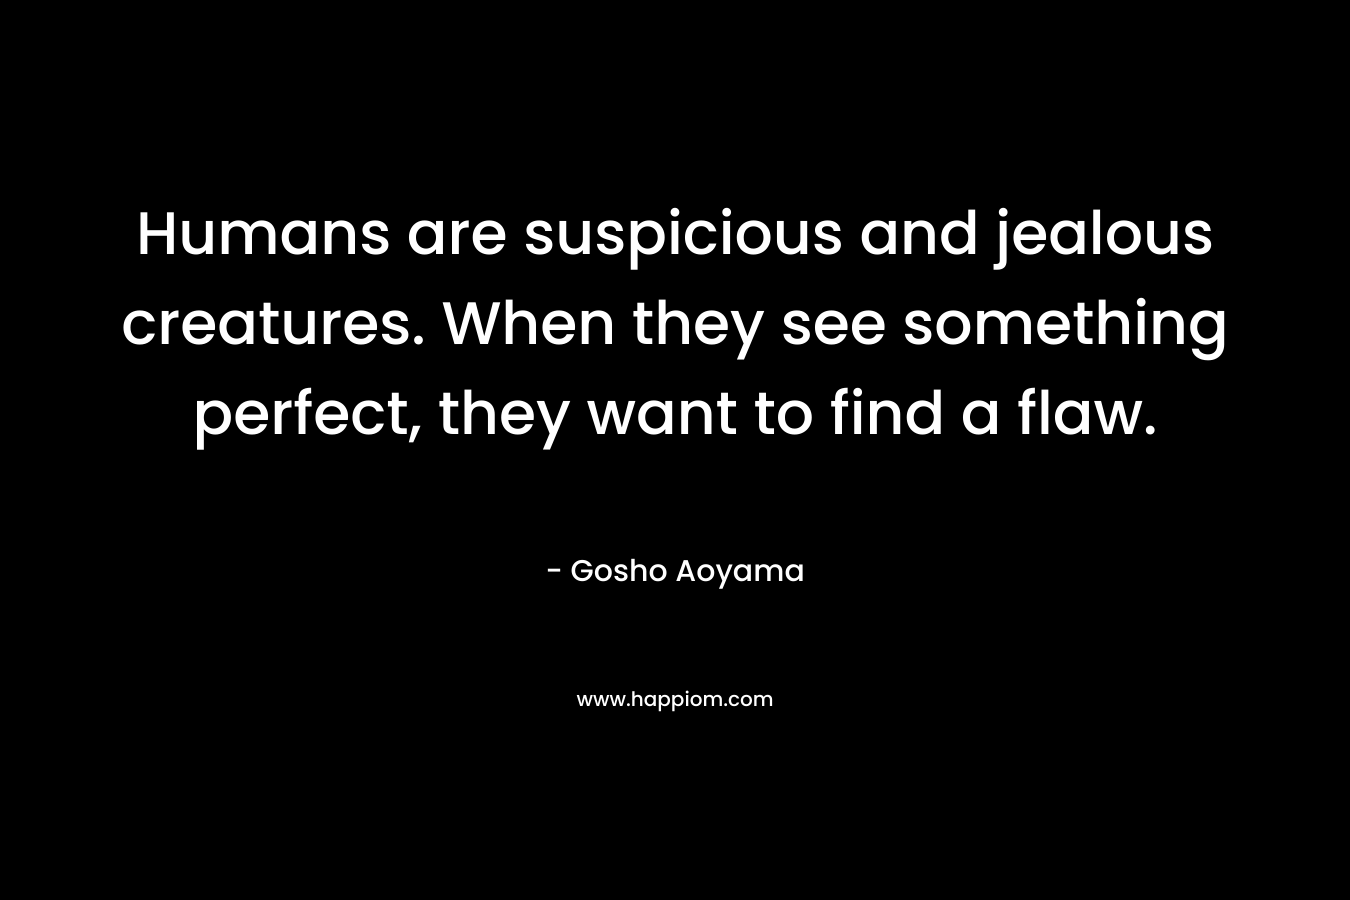 Humans are suspicious and jealous creatures. When they see something perfect, they want to find a flaw. – Gosho Aoyama